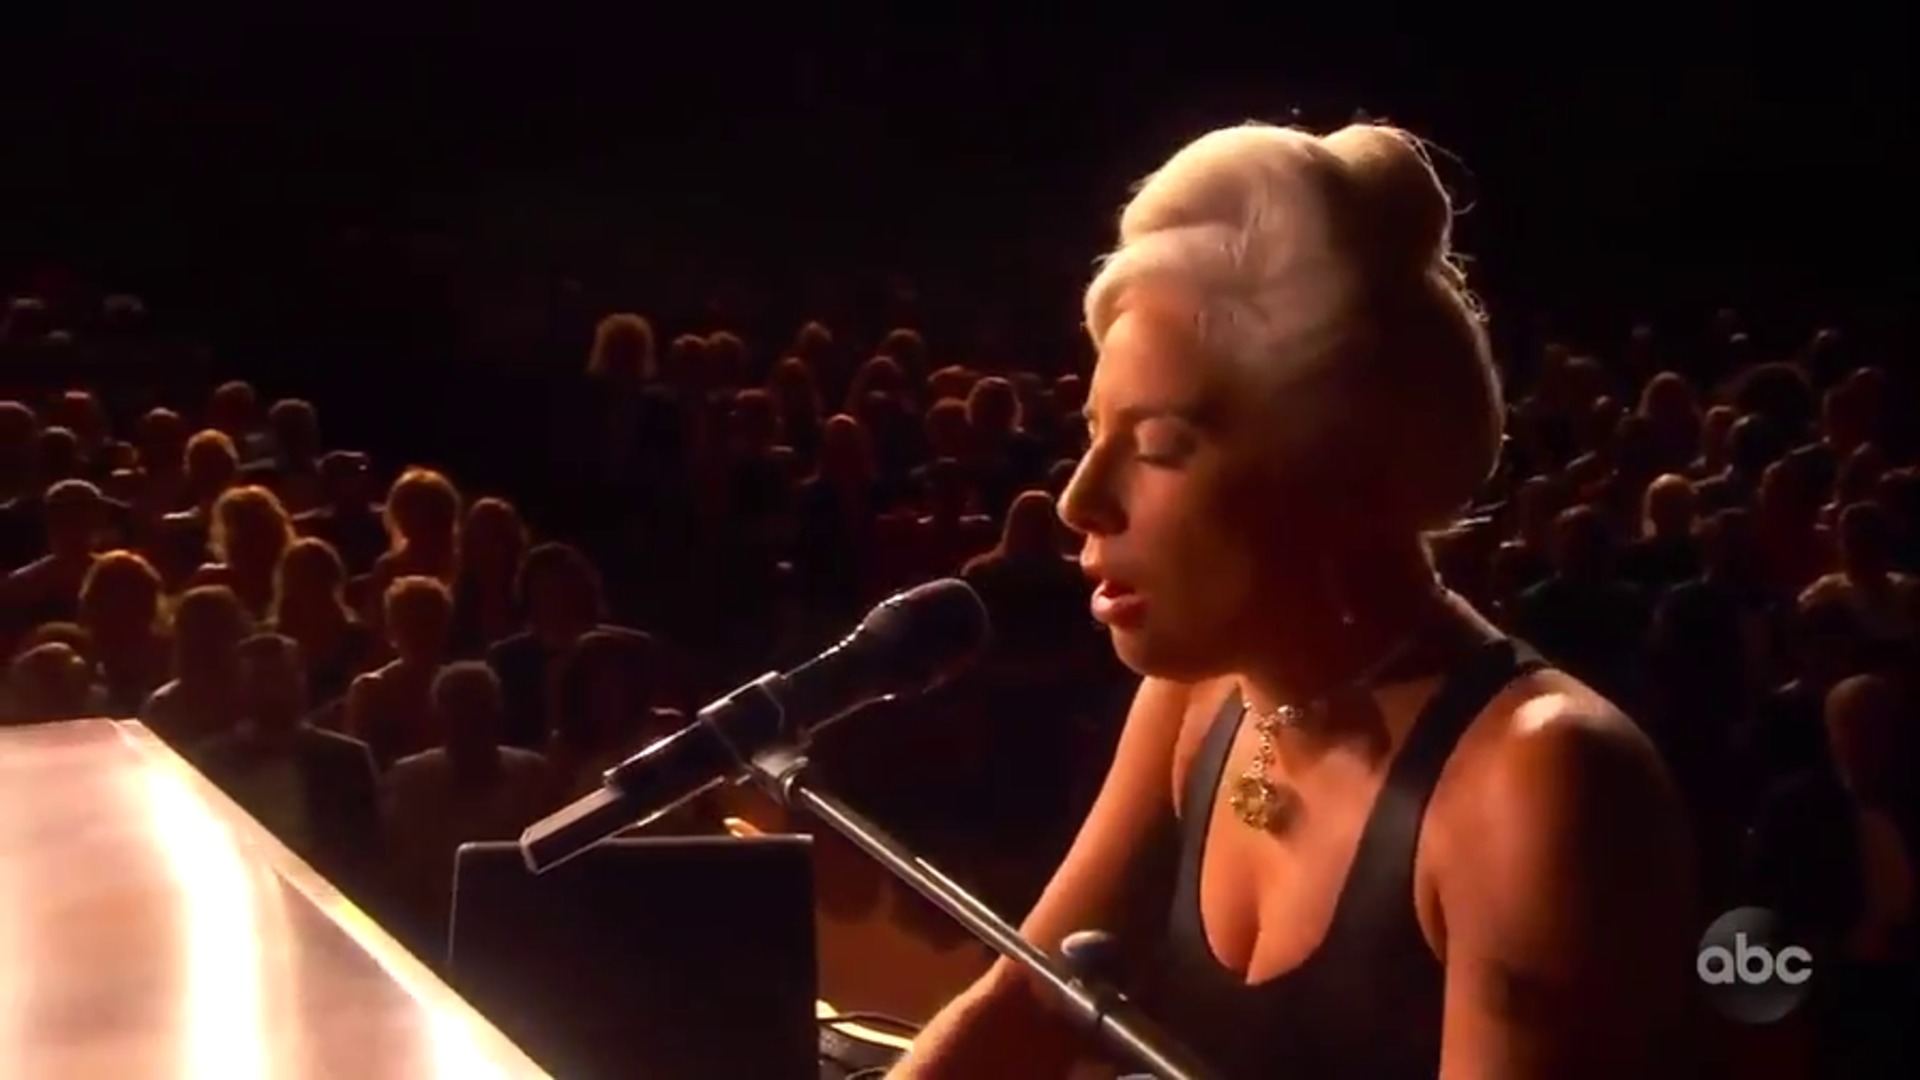 WATCH: Lady Gaga and Bradley Cooper perform “Shallow” live at the 2019 Oscars ...